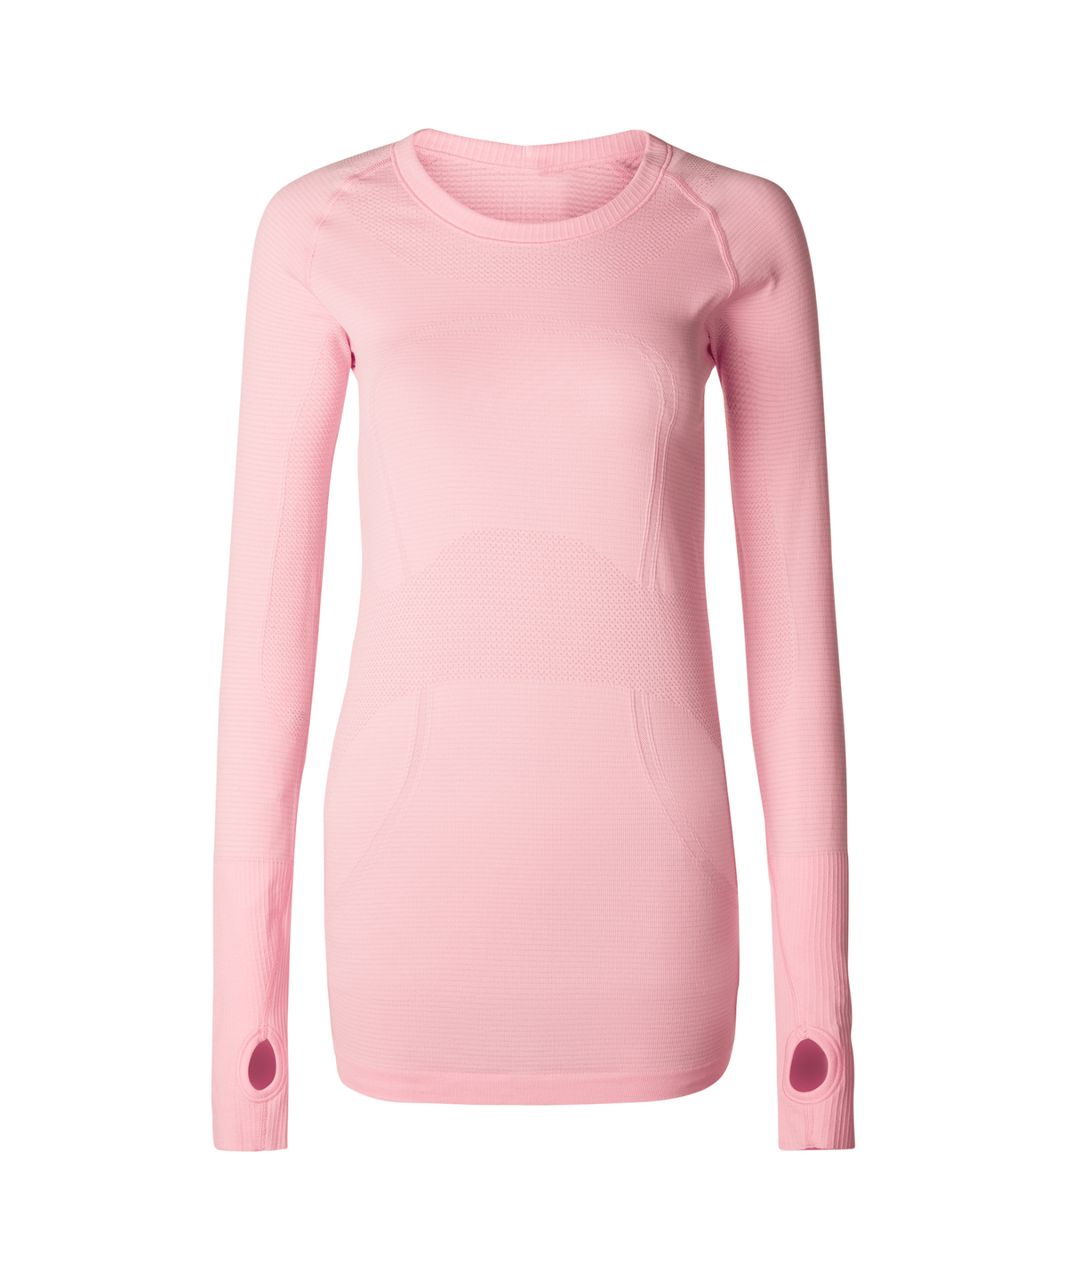 Lululemon Swiftly Tech Long Sleeve Crew - Heathered Bleached Coral